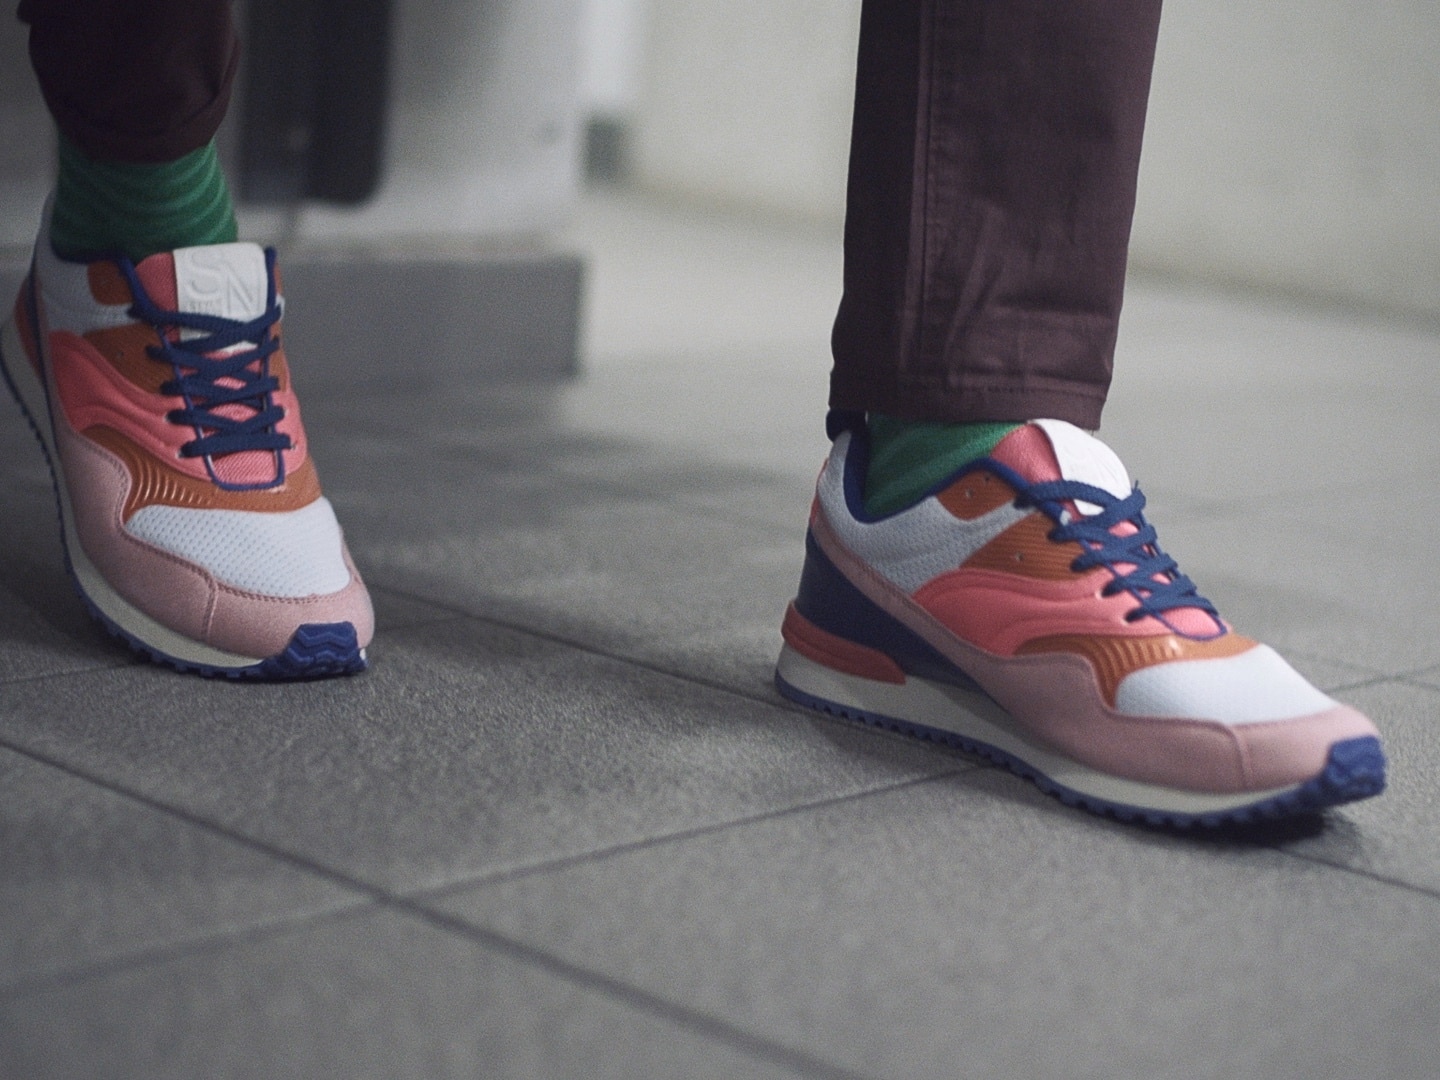 A guy in brightly colored trainers.